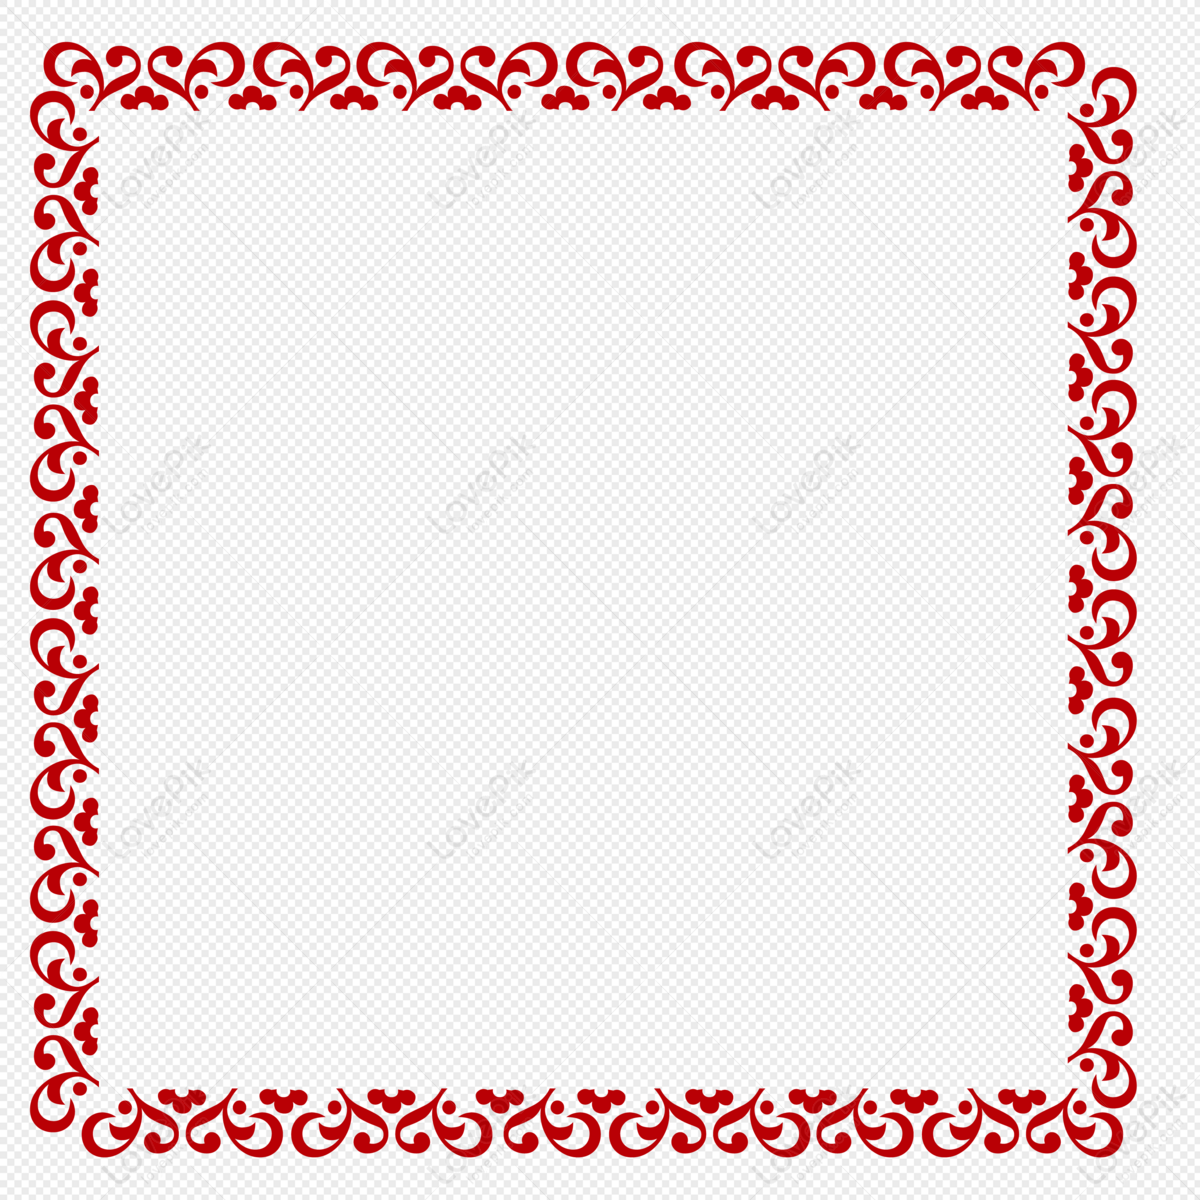 Red Border PNGs for Free Download